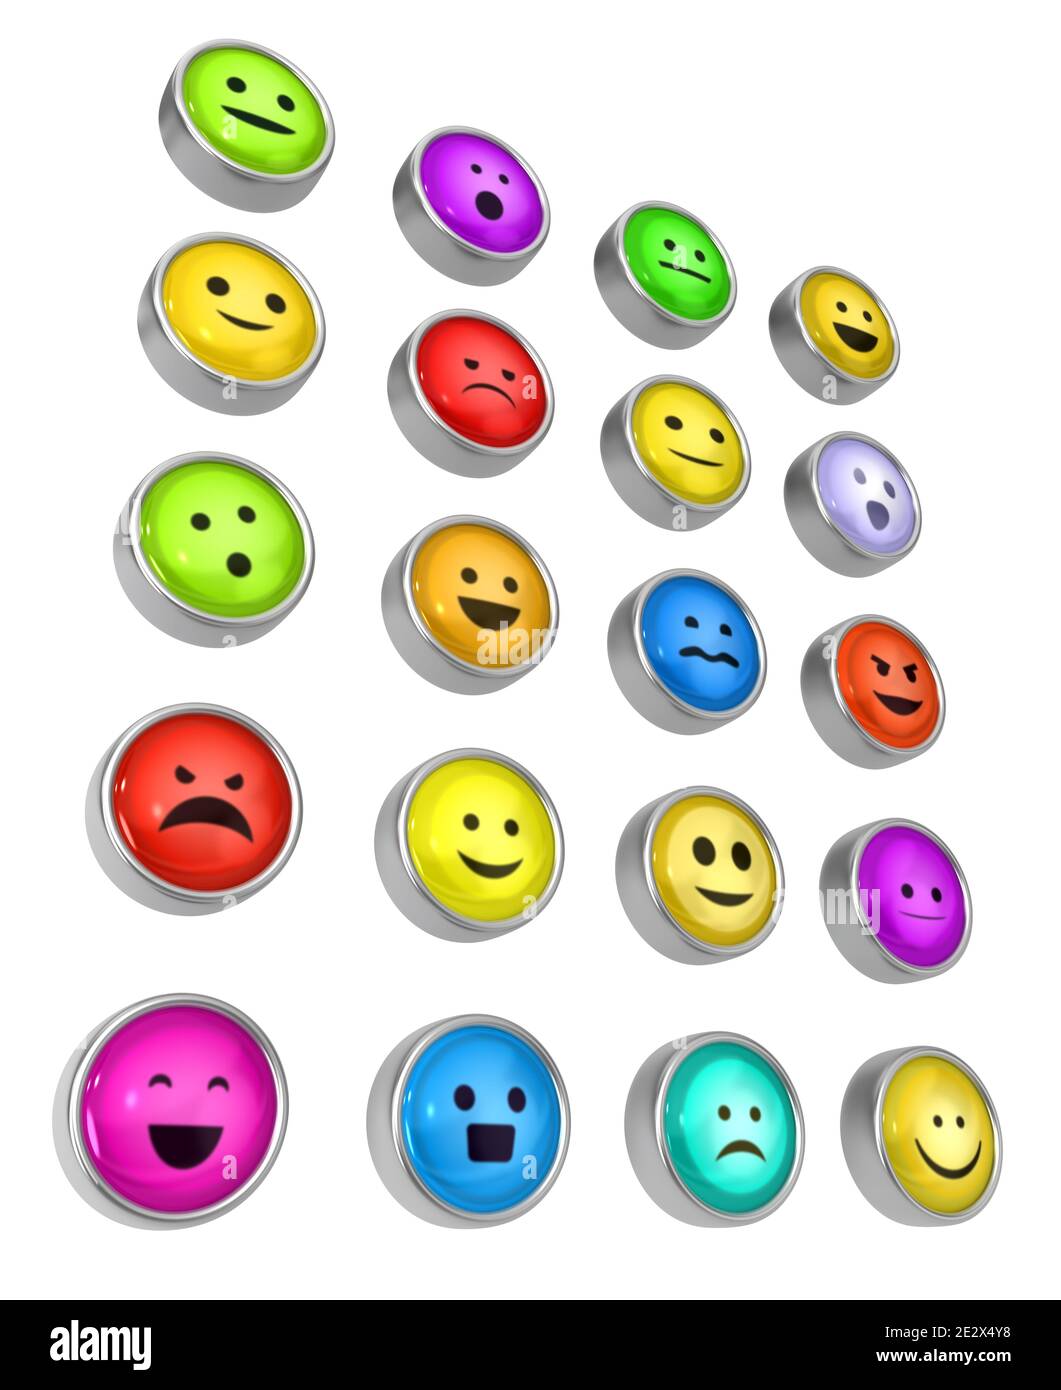 Emotion buttons metal 3d illustration, isolated, over white, horizontal  Stock Photo - Alamy